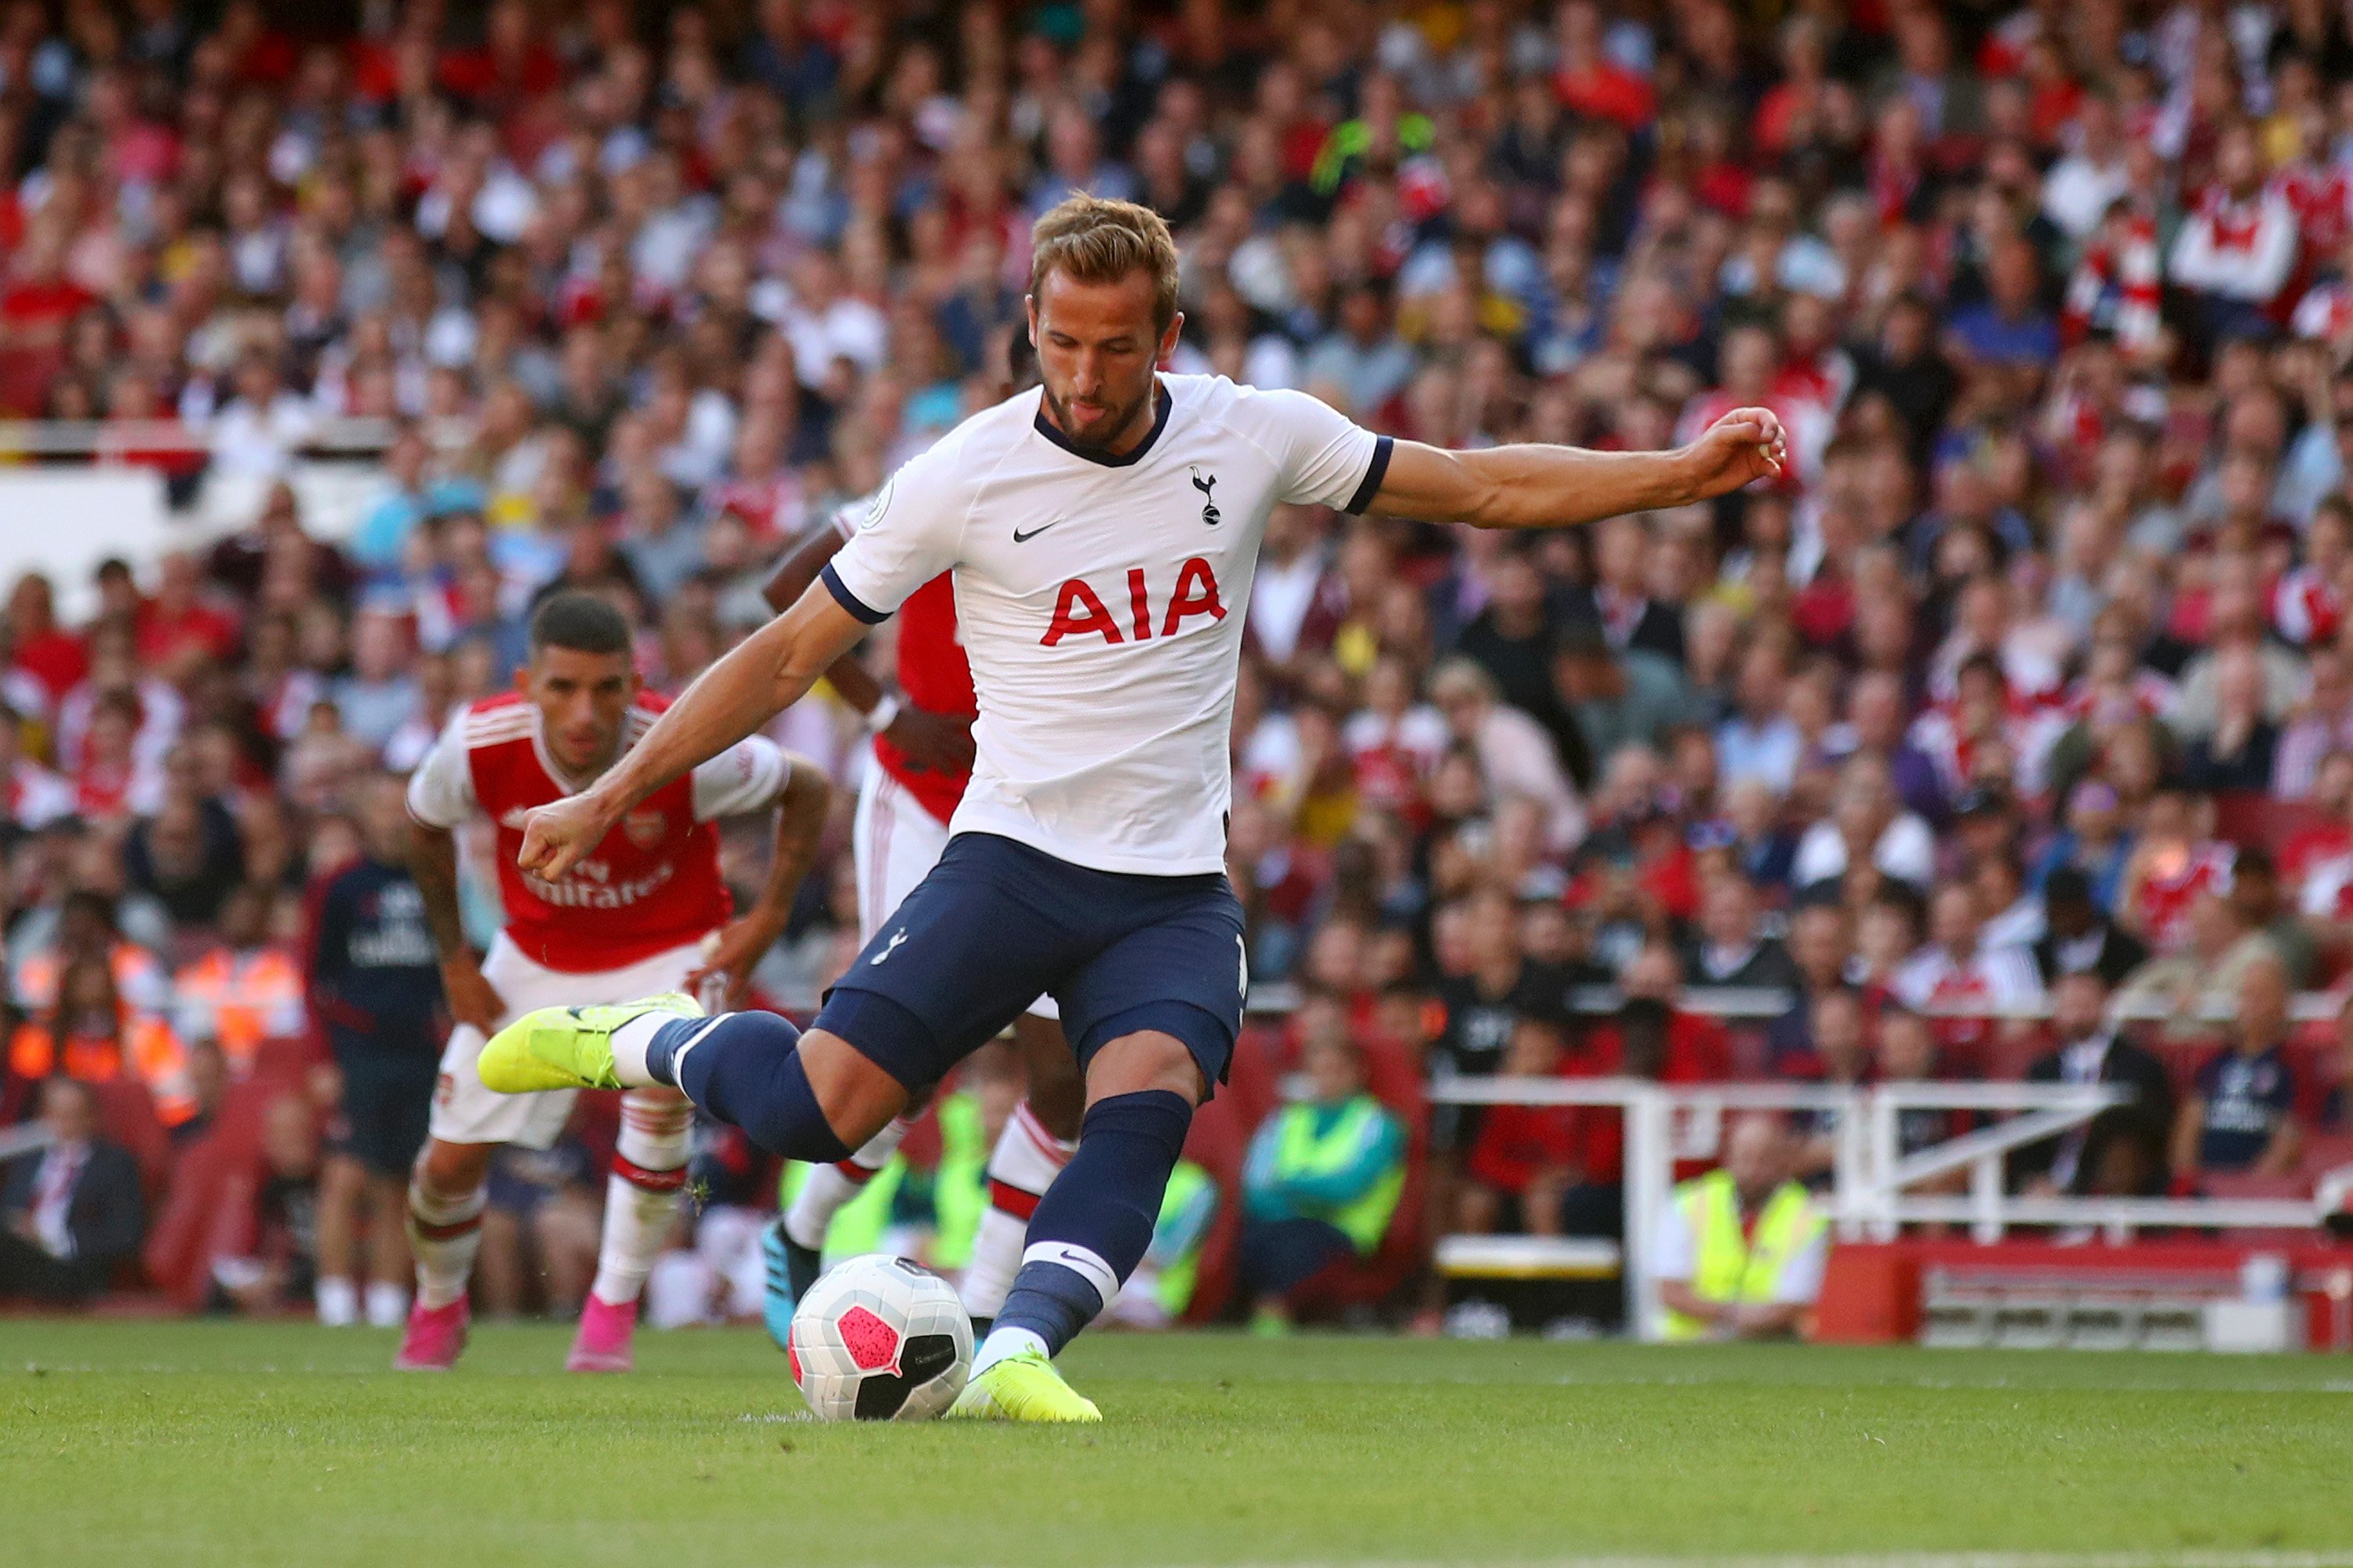 Tottenham Hotspur manager Jose Mourinho has given a promising update on the current status of ace striker Harry Kane.